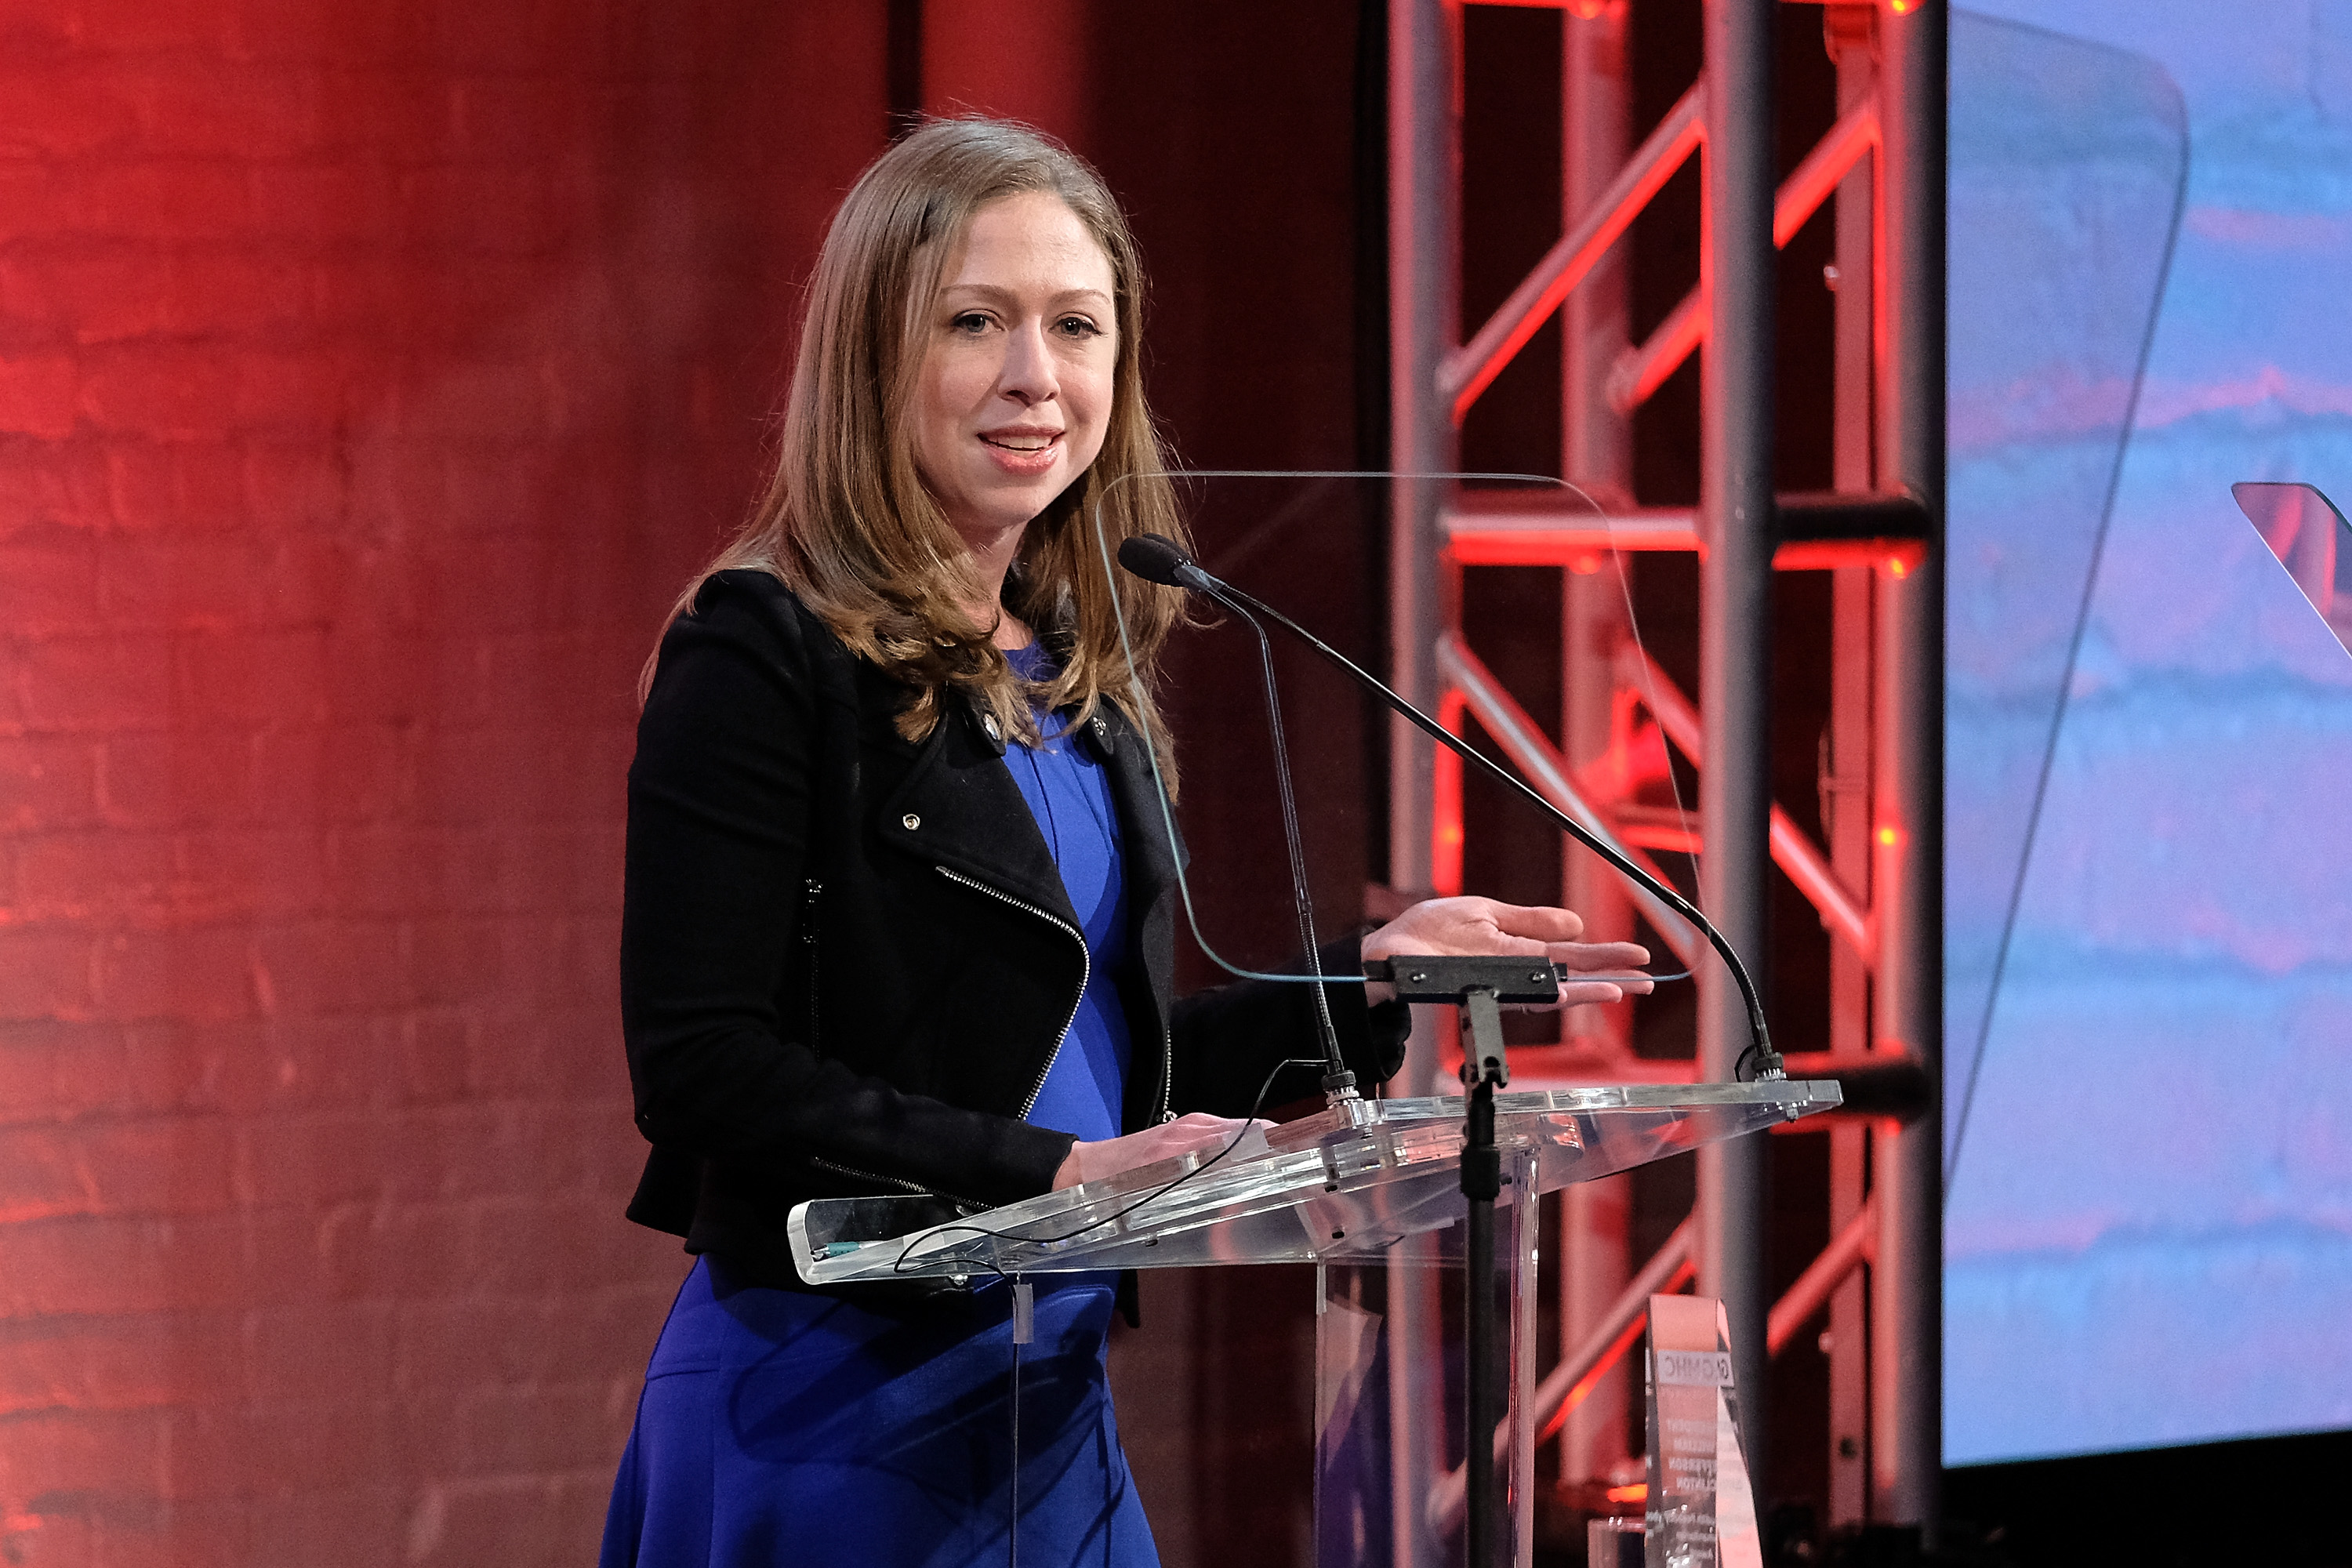 NEW YORK, NY - MARCH 23:  Chelsea Clinton accepts an award on behalf of her father, former US president Bill Clinton, during the GMHC 35th Anniversary Spring Gala at Highline Stages on March 23, 2017 in New York City.  (Photo by D Dipasupil/FilmMagic) (D Dipasupil&mdash;FilmMagic)